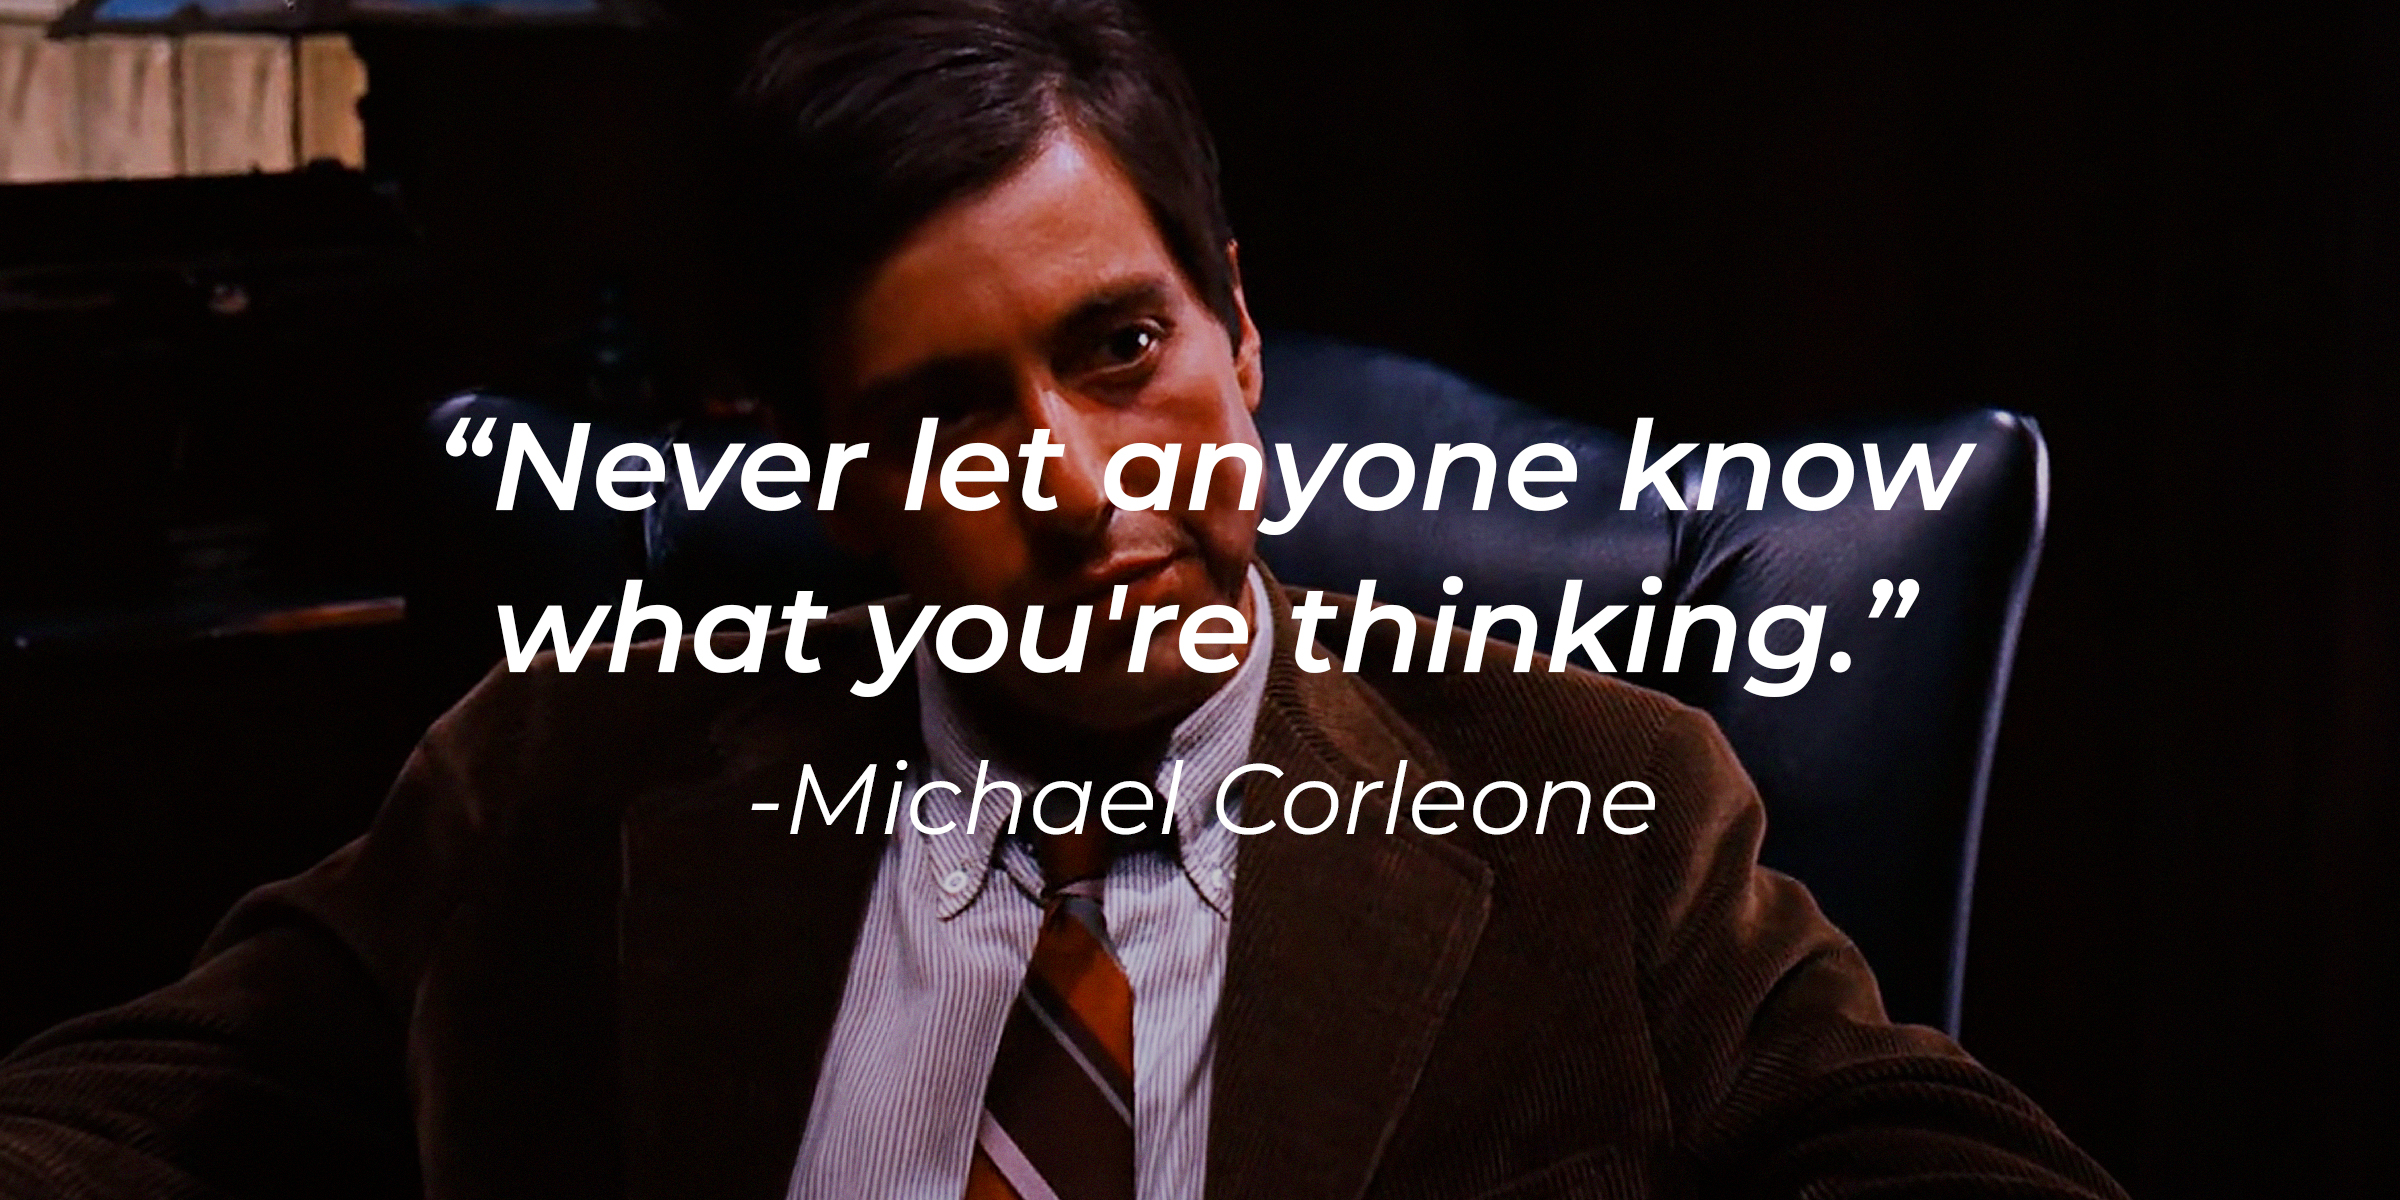 Michael Corleone's quote: "Never let anyone know what you're thinking." | Source: Facebook/thegodfather